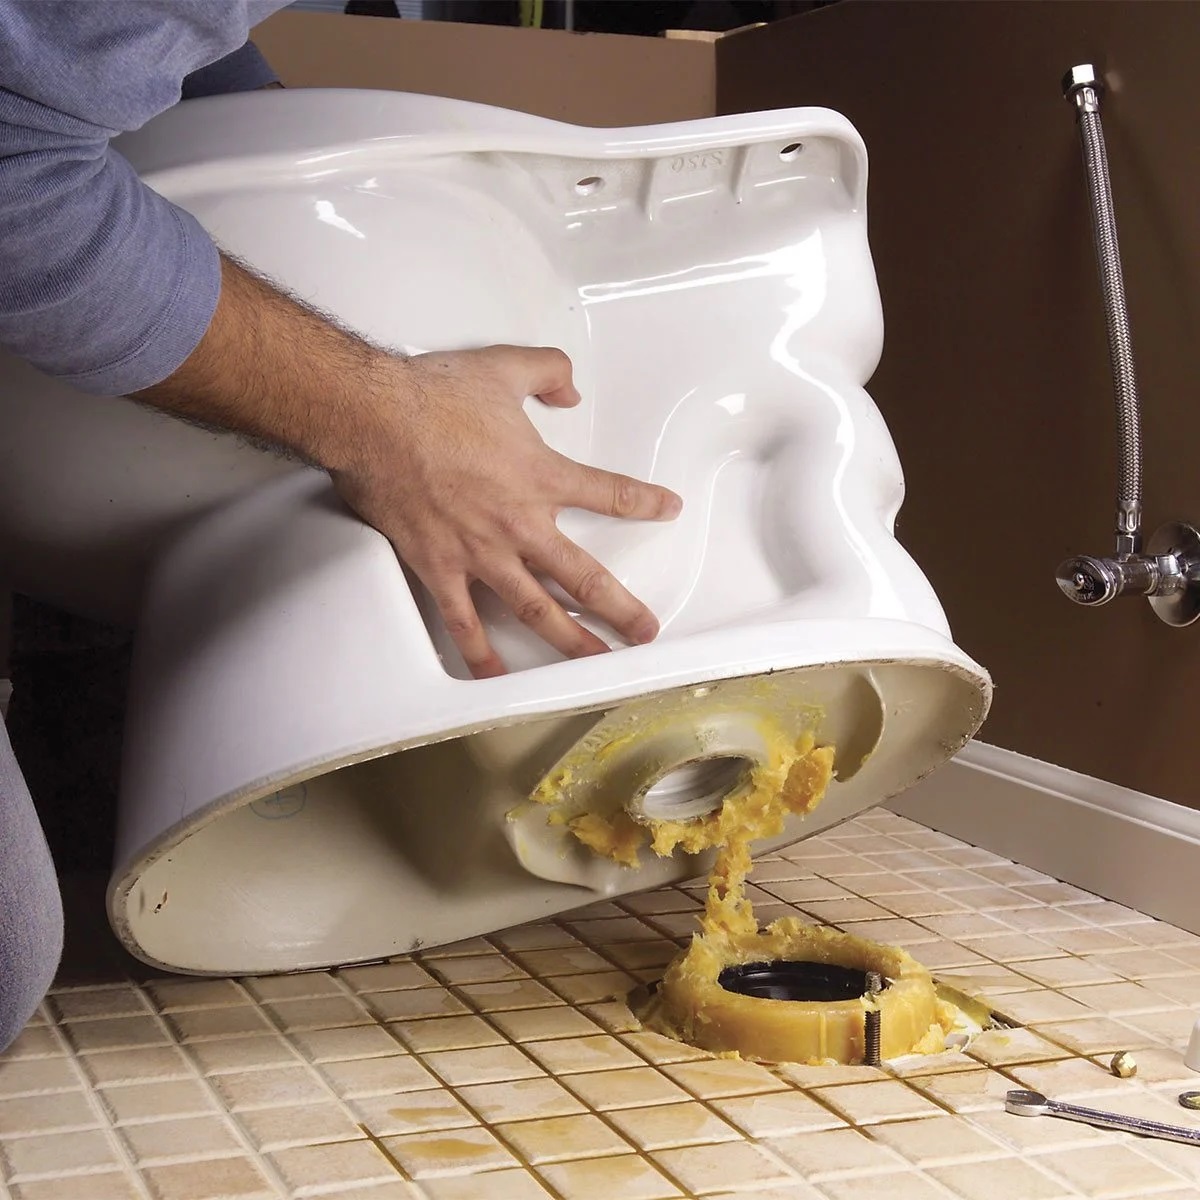 How To Get Rid Of Old Toilet